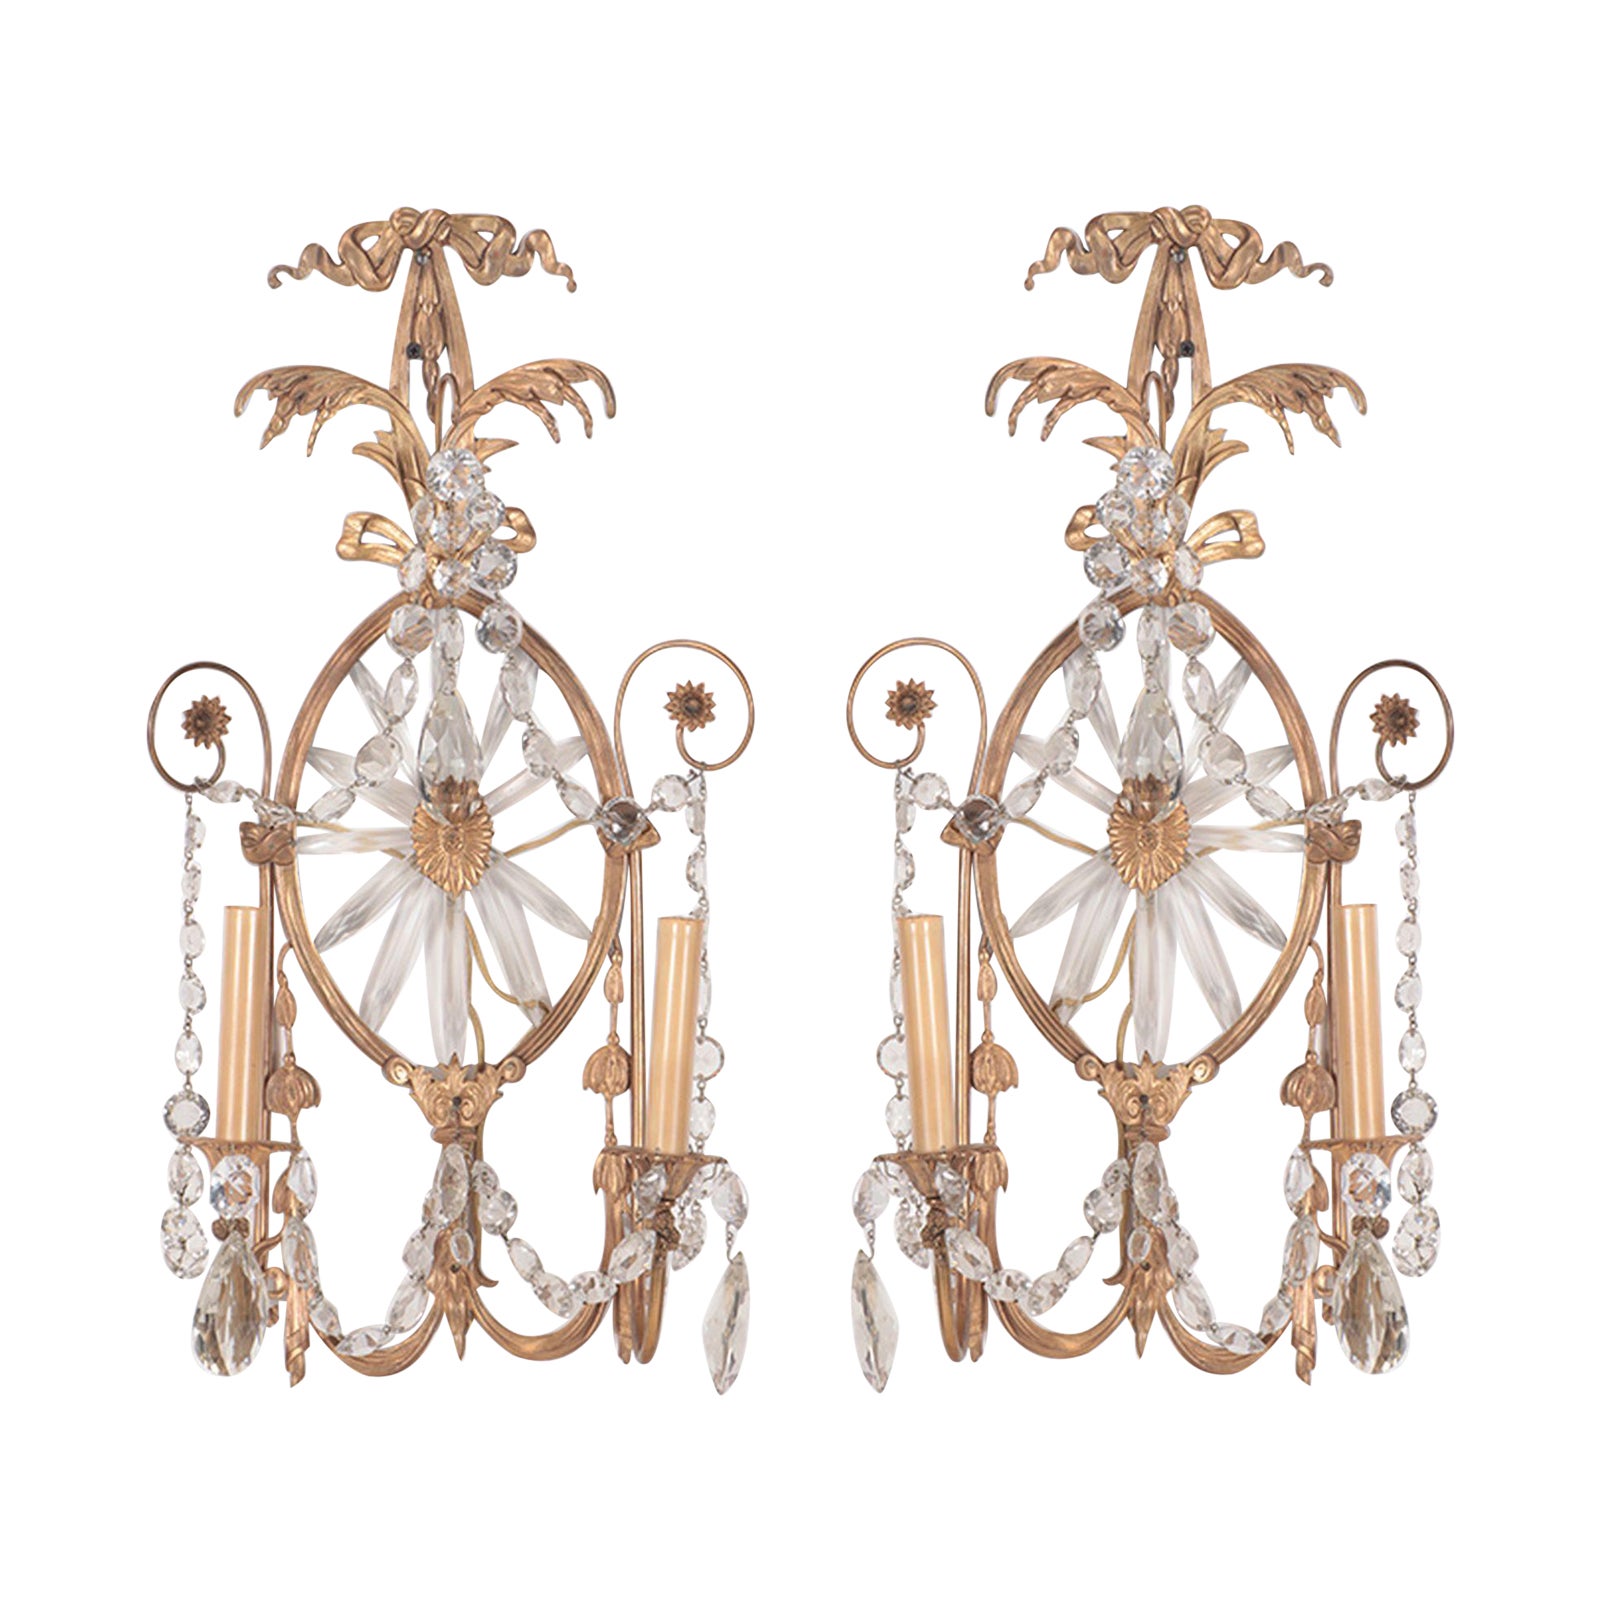 Pair of Early 20th Century Regency Style Bronze & Crystal Wall Sconces